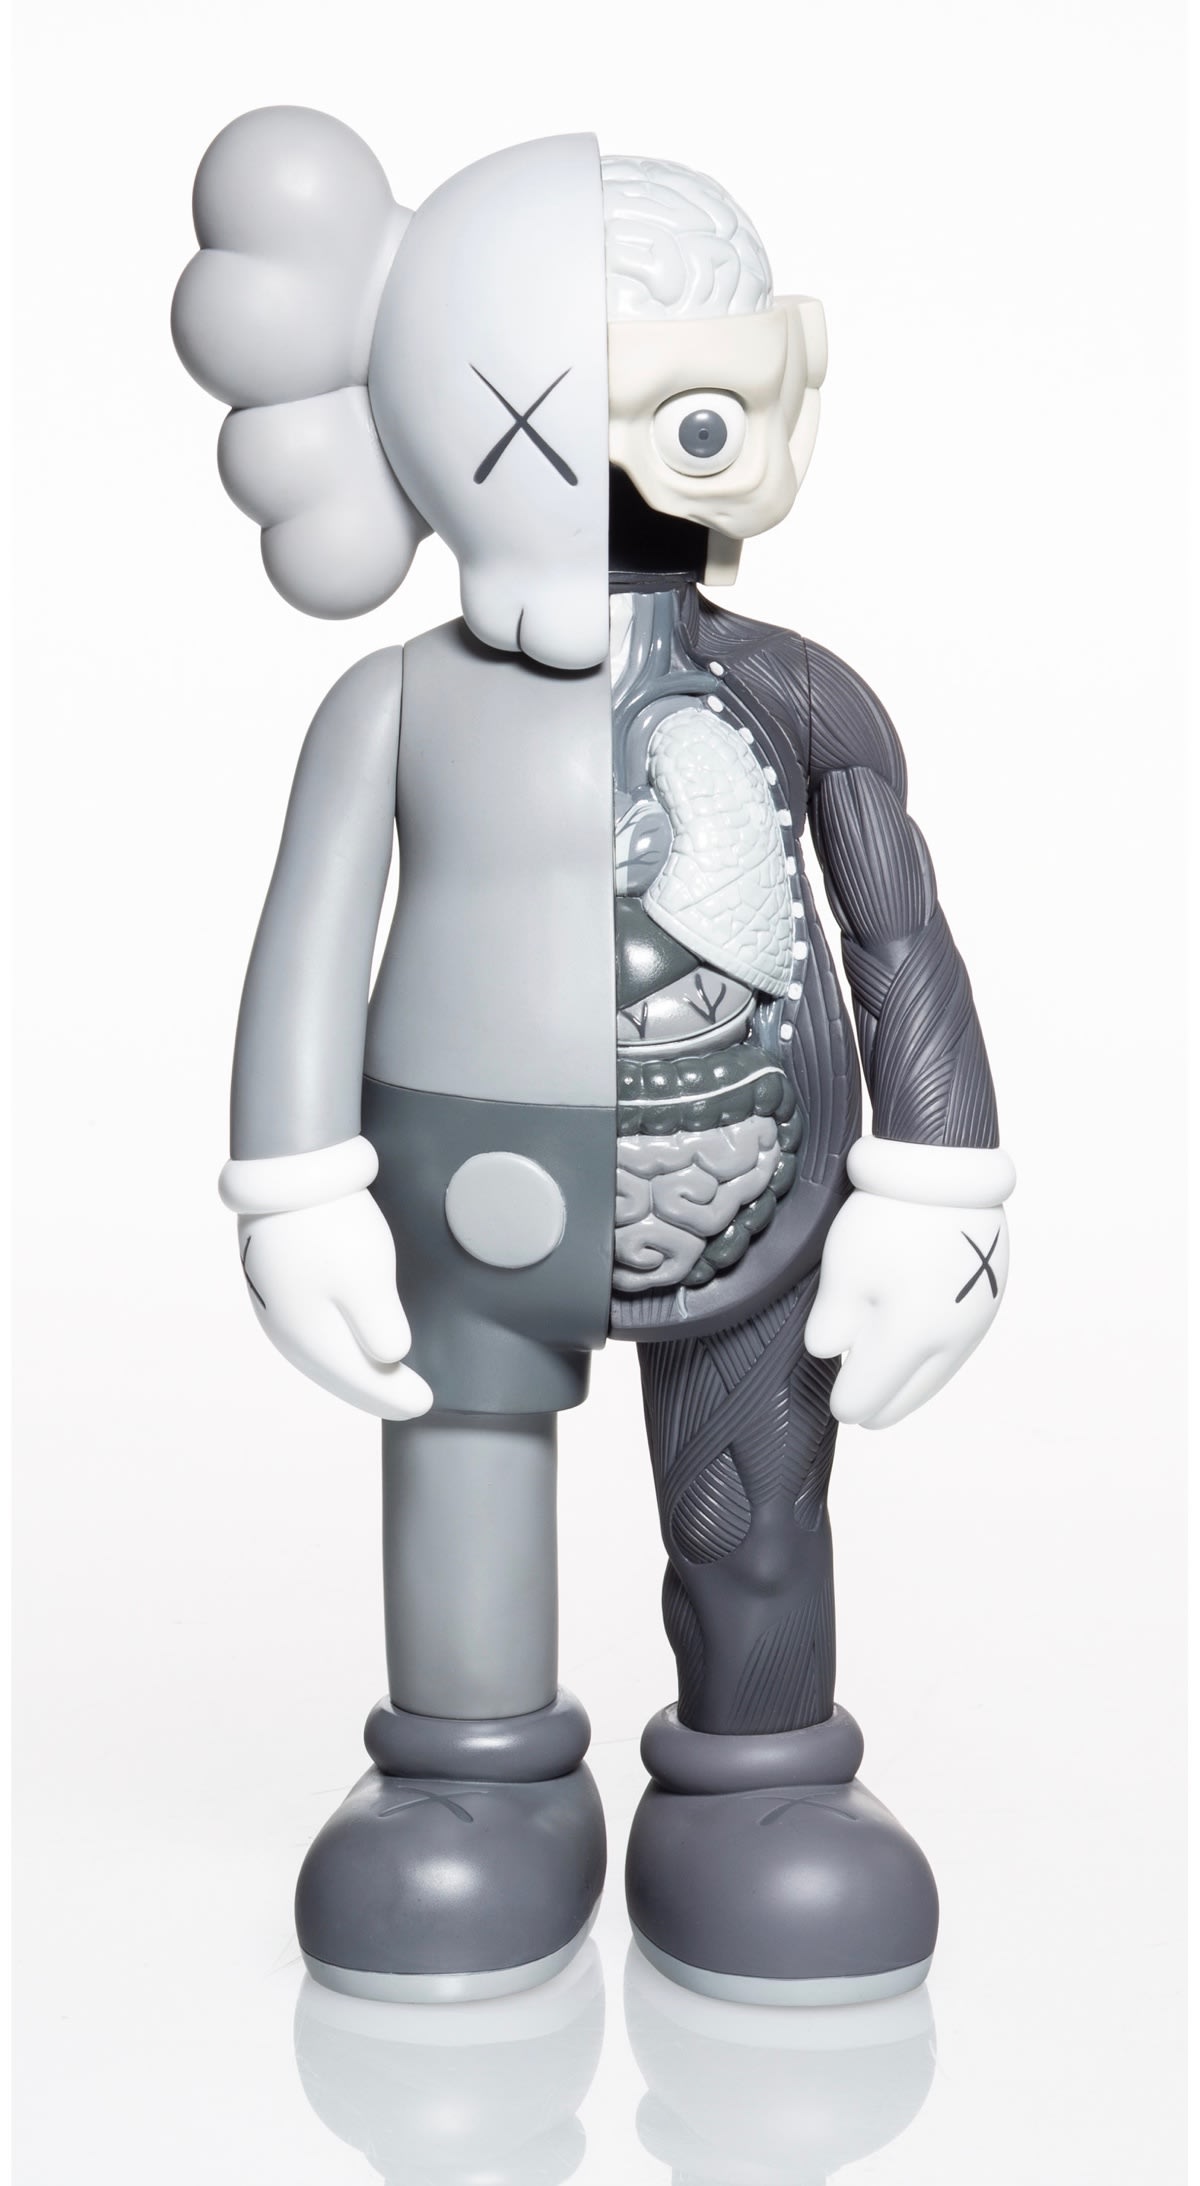 KAWS Dissected Companion(2006) 美品 女の子向けプレゼント集結 - その他